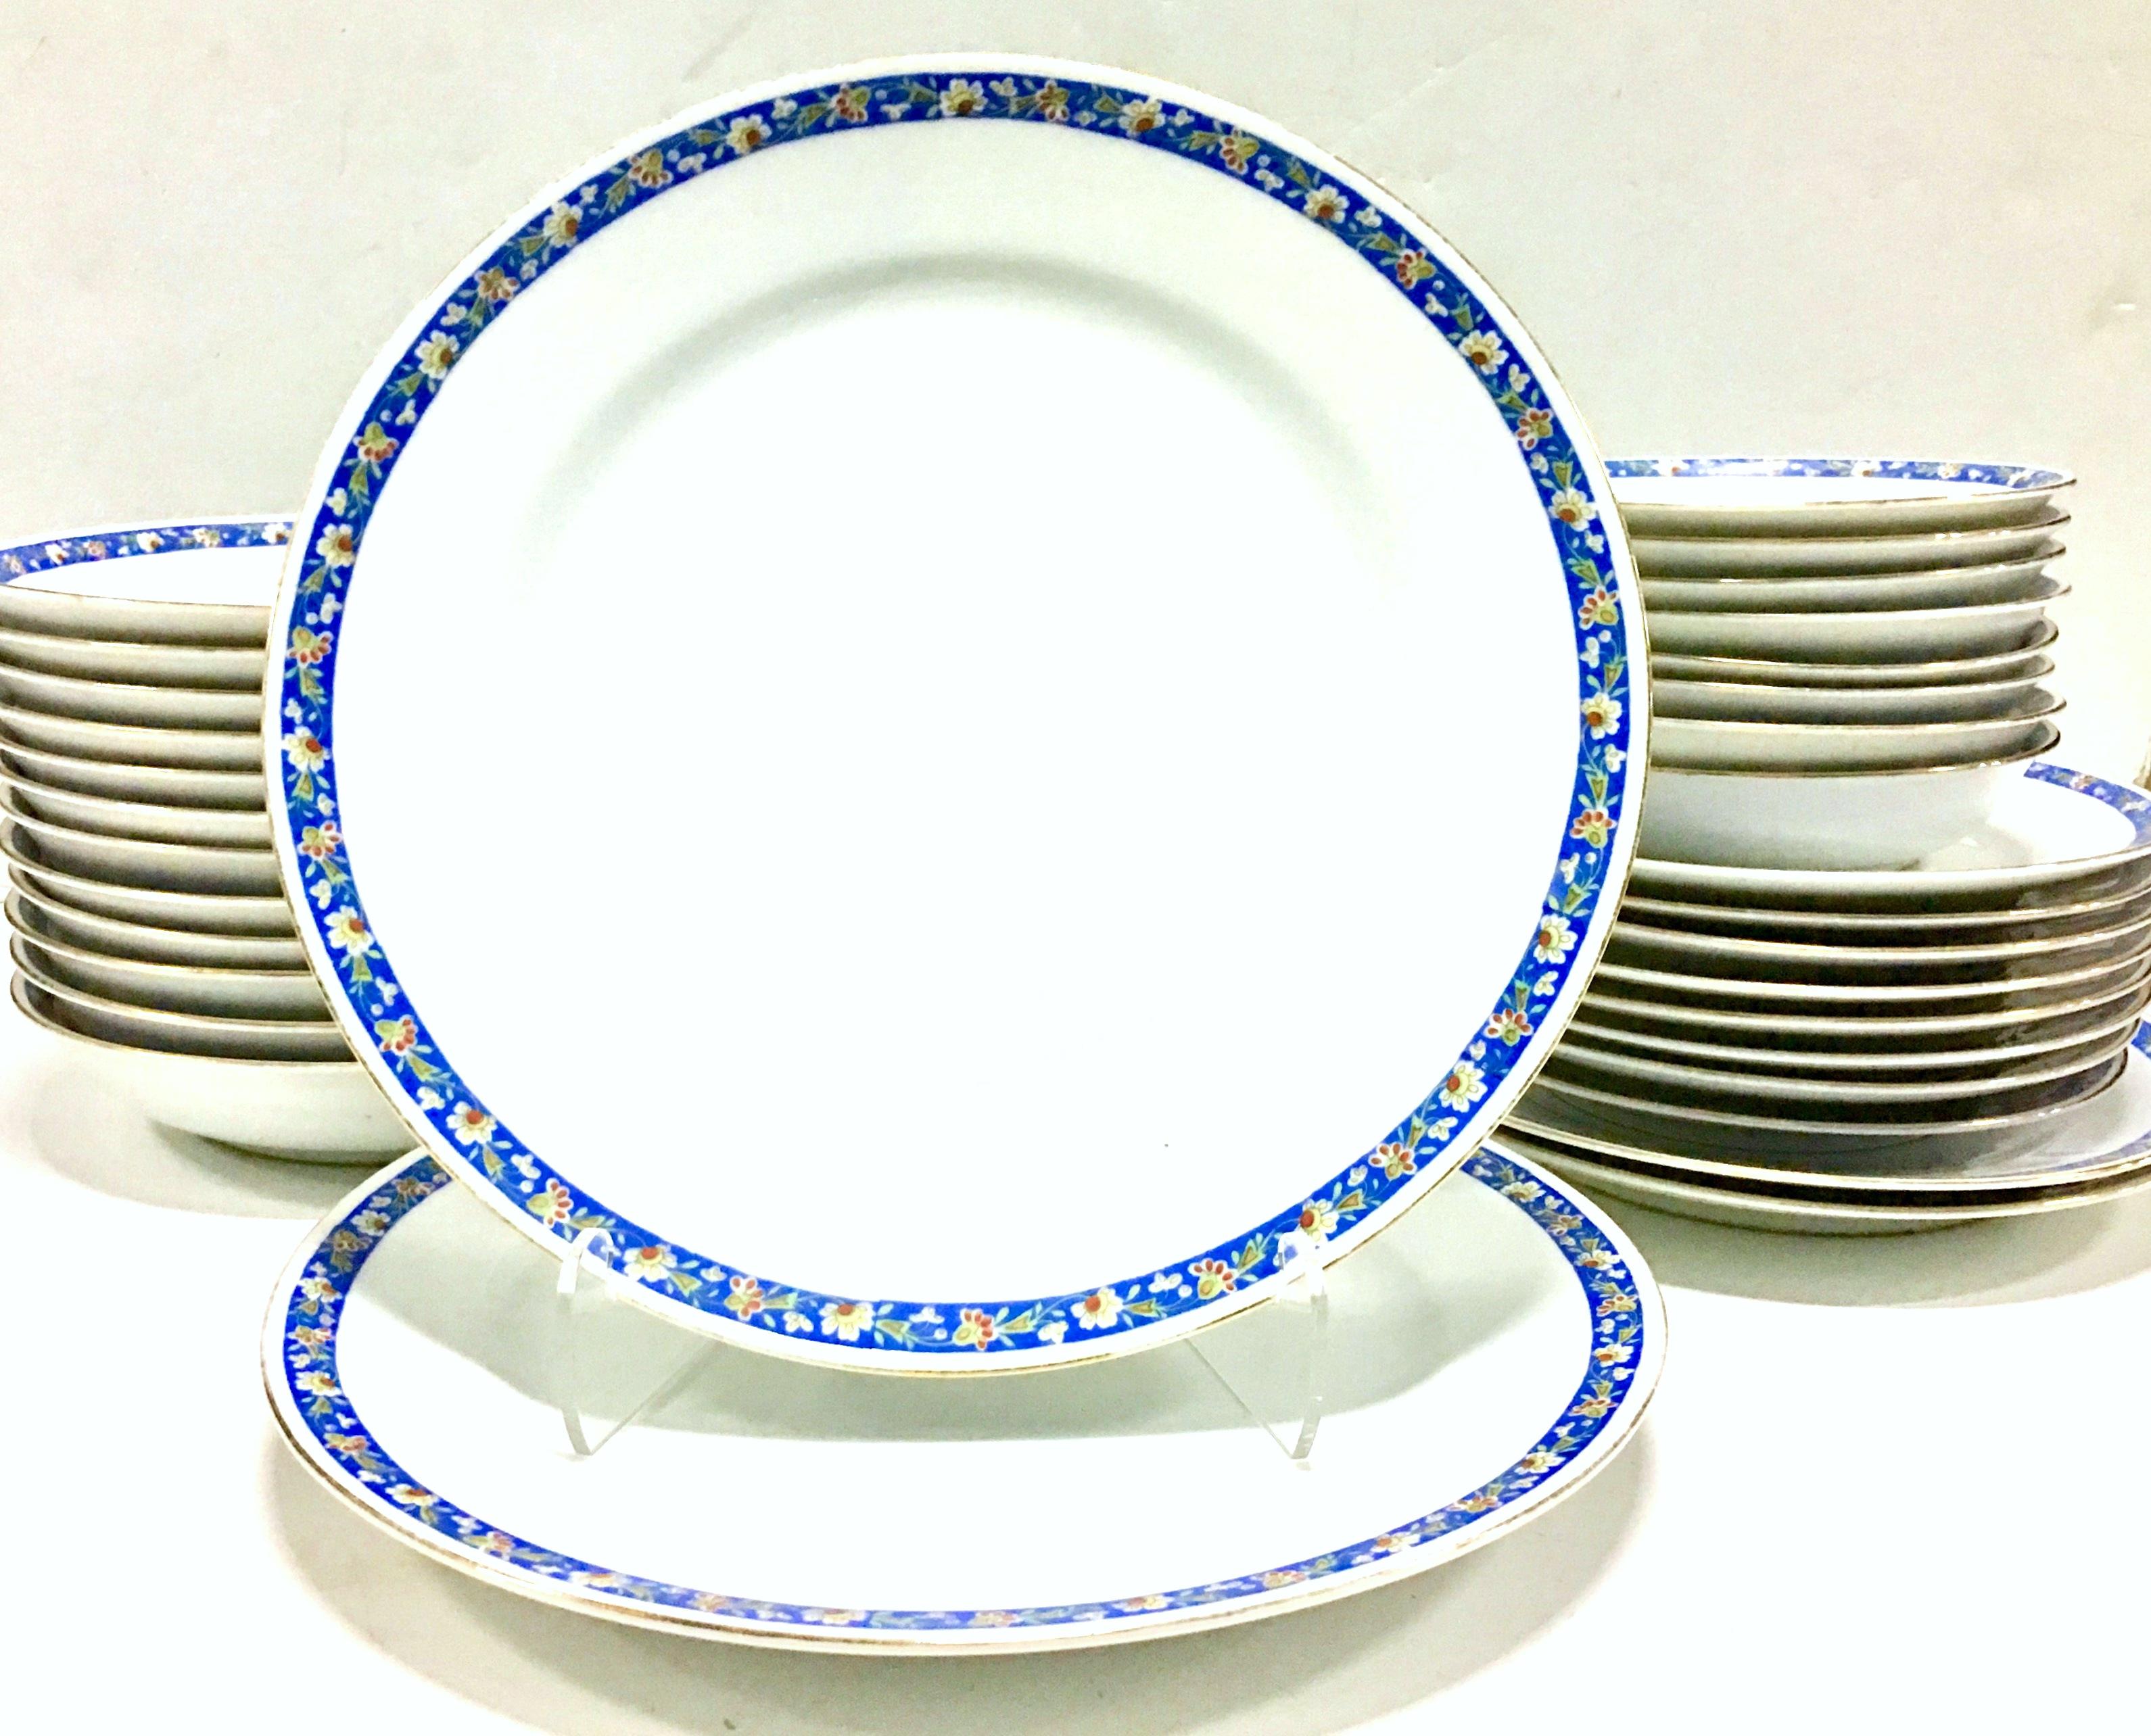 1930s Japanese Art Deco hand painted porcelain dinnerware set of 32 pieces by, Morimura Brothers. Pattern features a bright white ground with a bright blue, green, yellow floral vine motif. There is a 22-karat gold rim edge detail. Each piece is